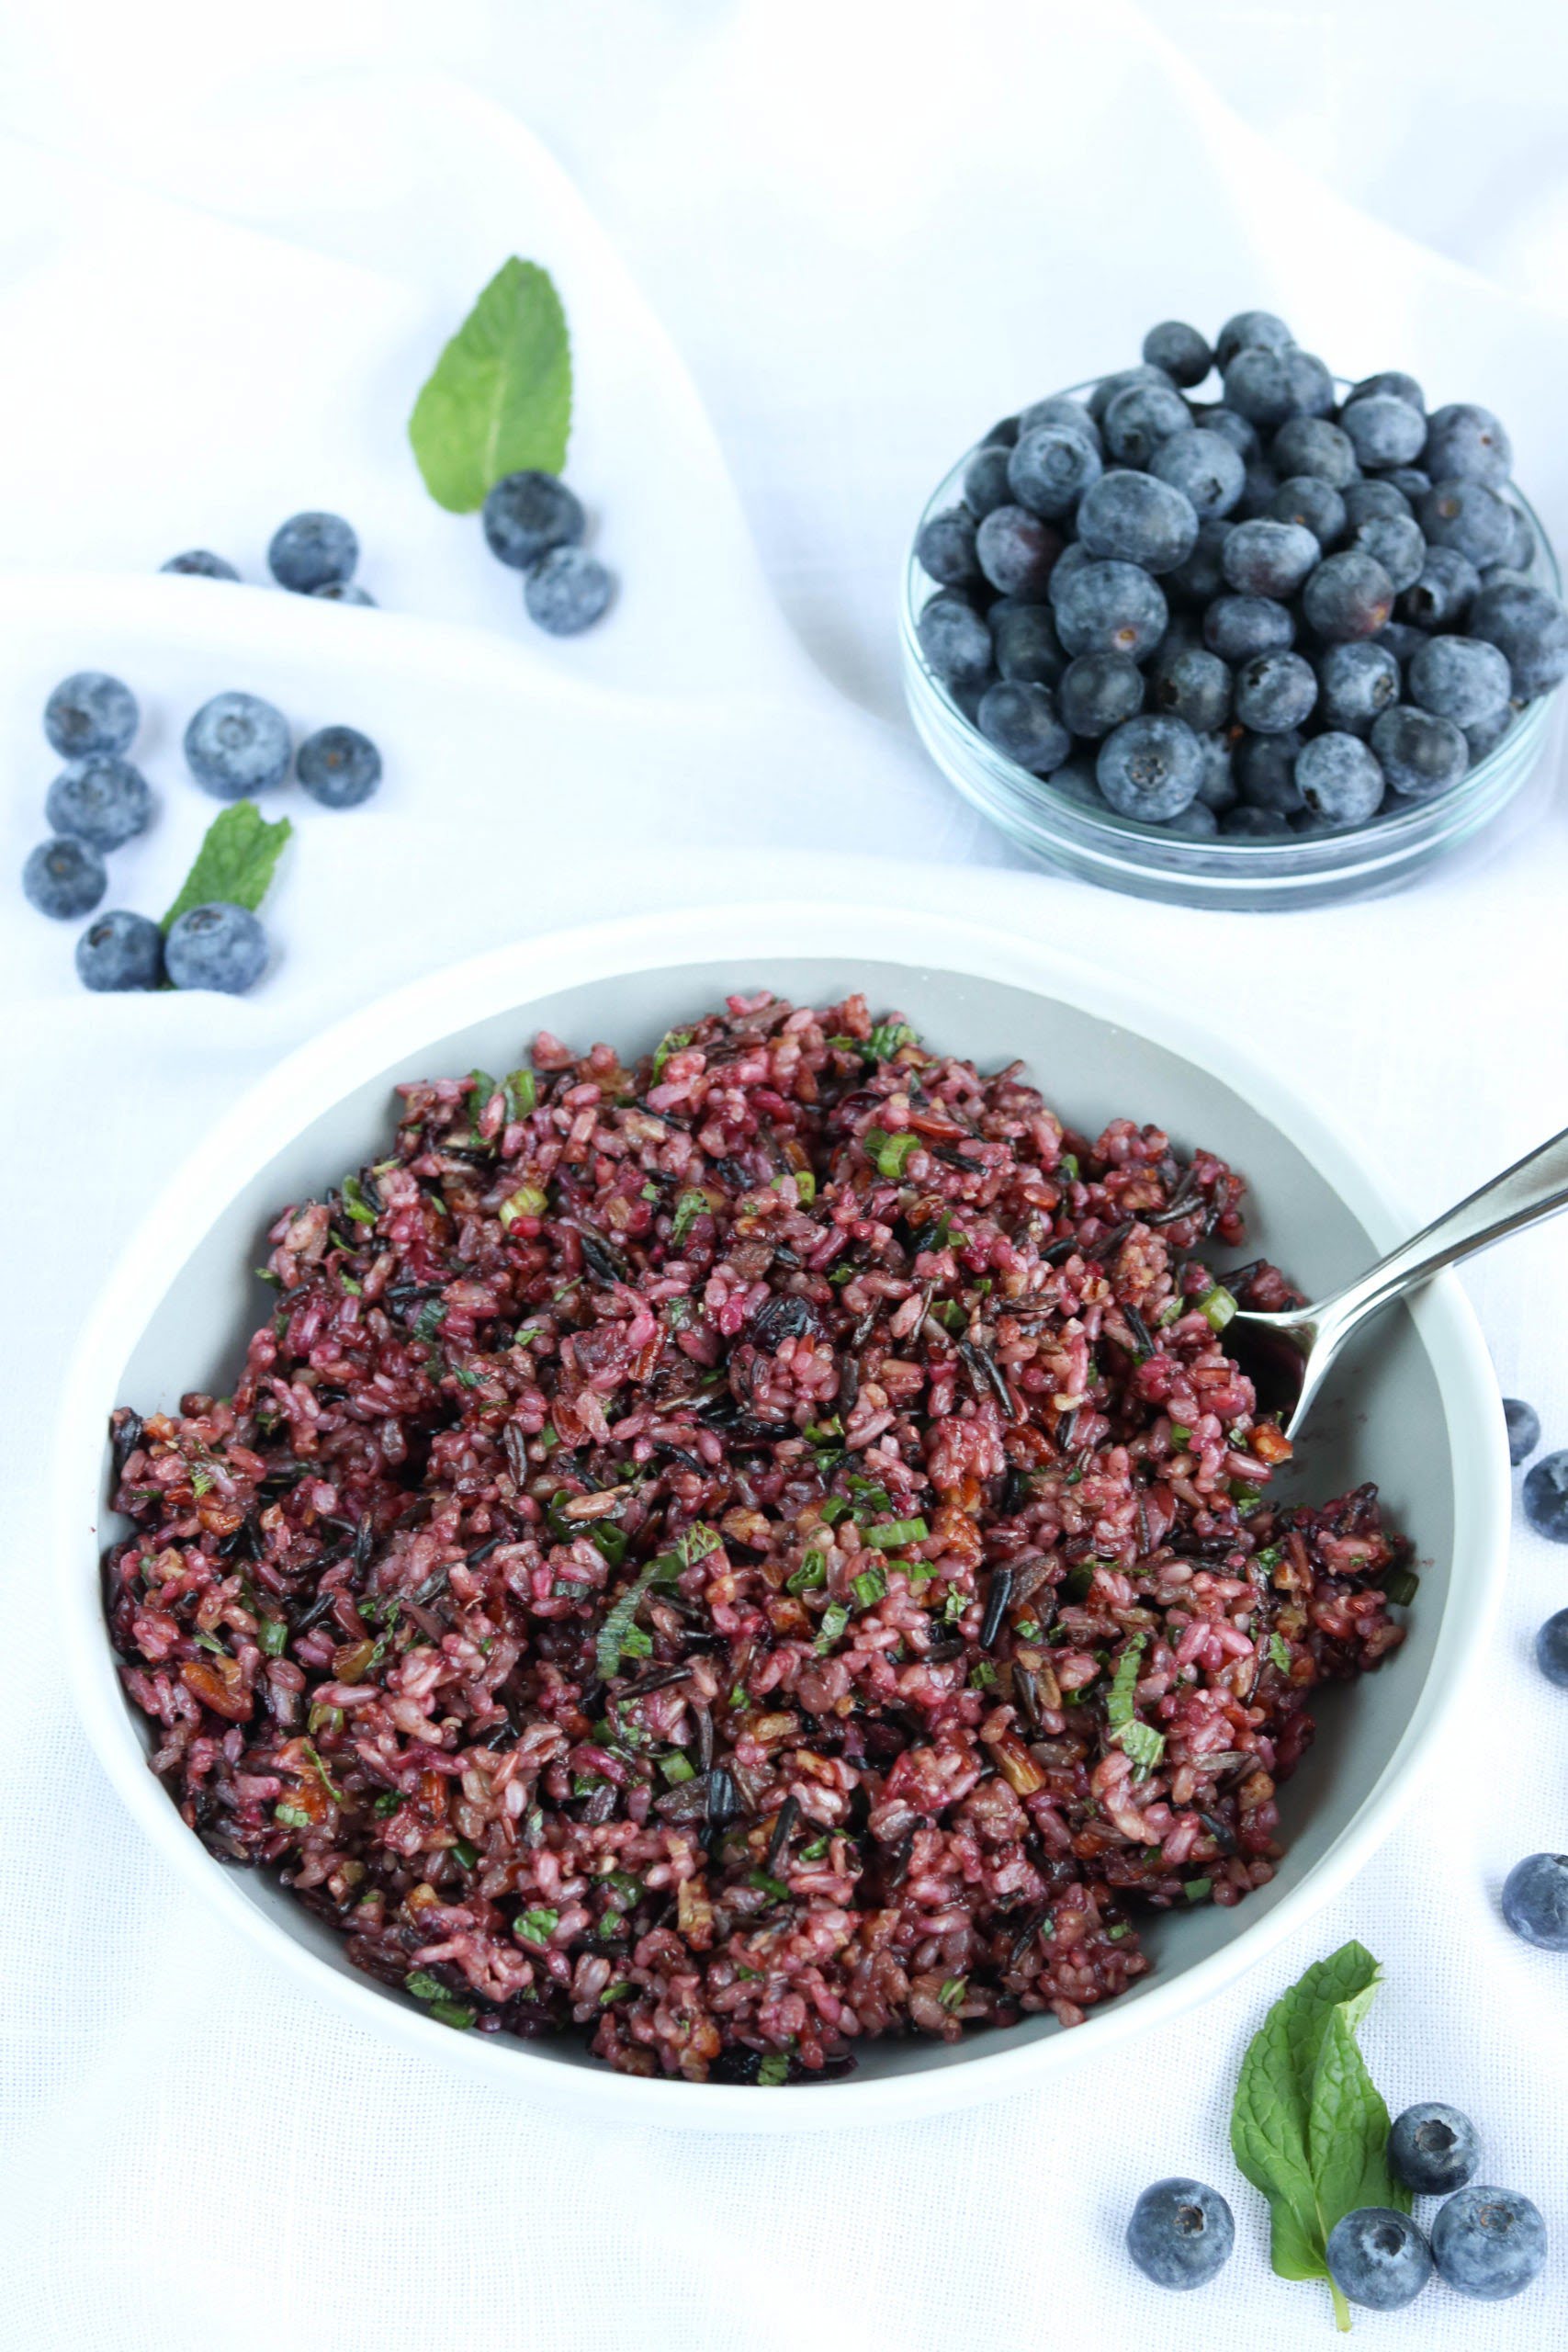 Blueberry Wild Rice Salad with Fresh Blueberries